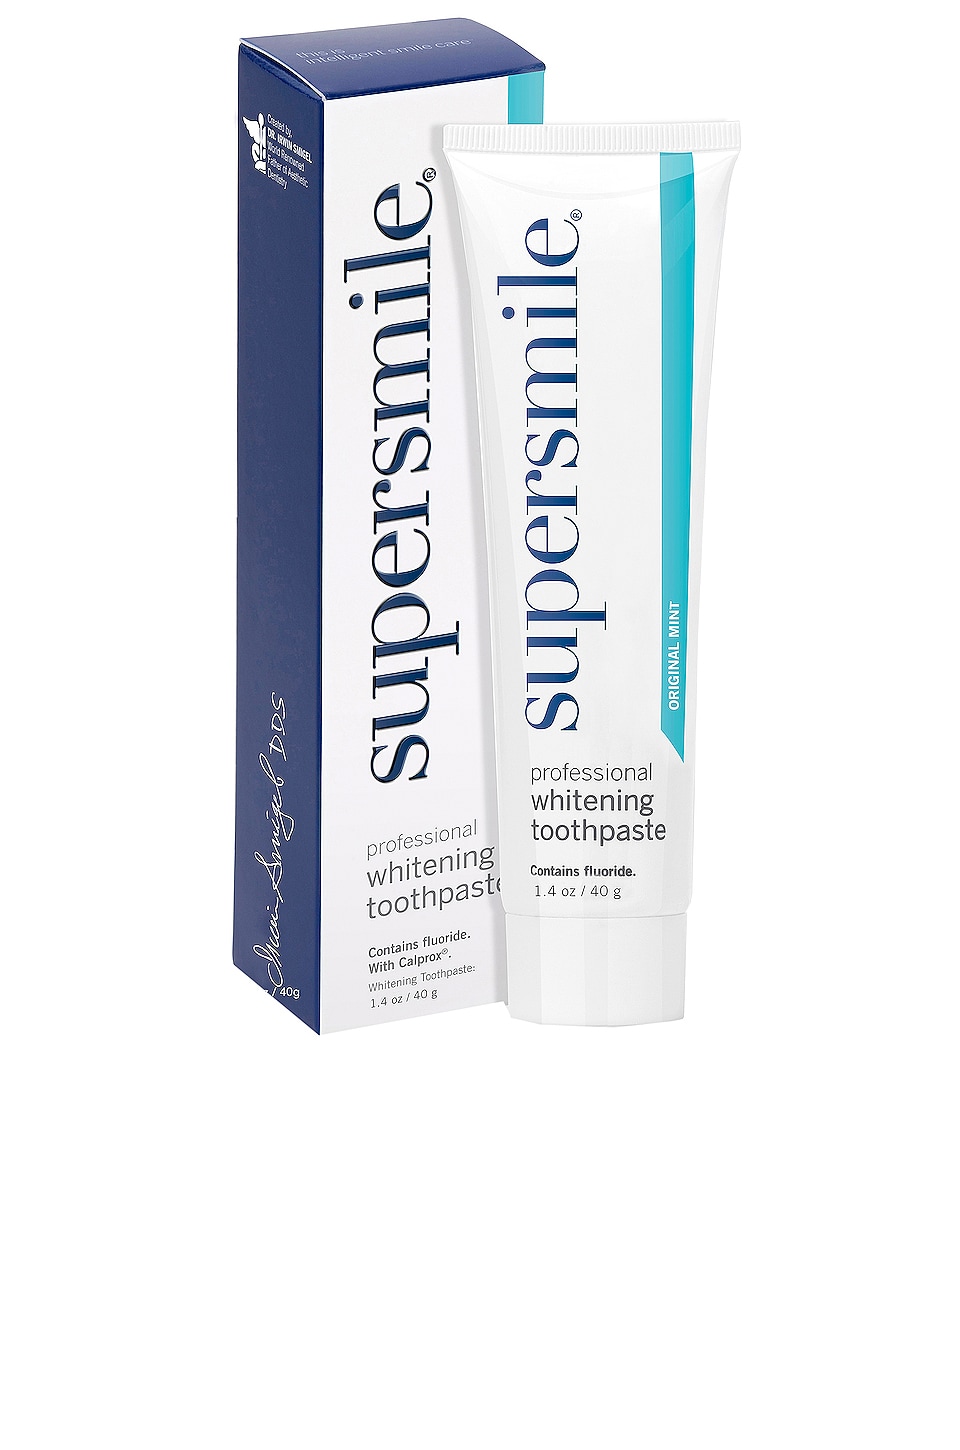 Shop Supersmile Professional Whitening Toothpaste In Original Mint